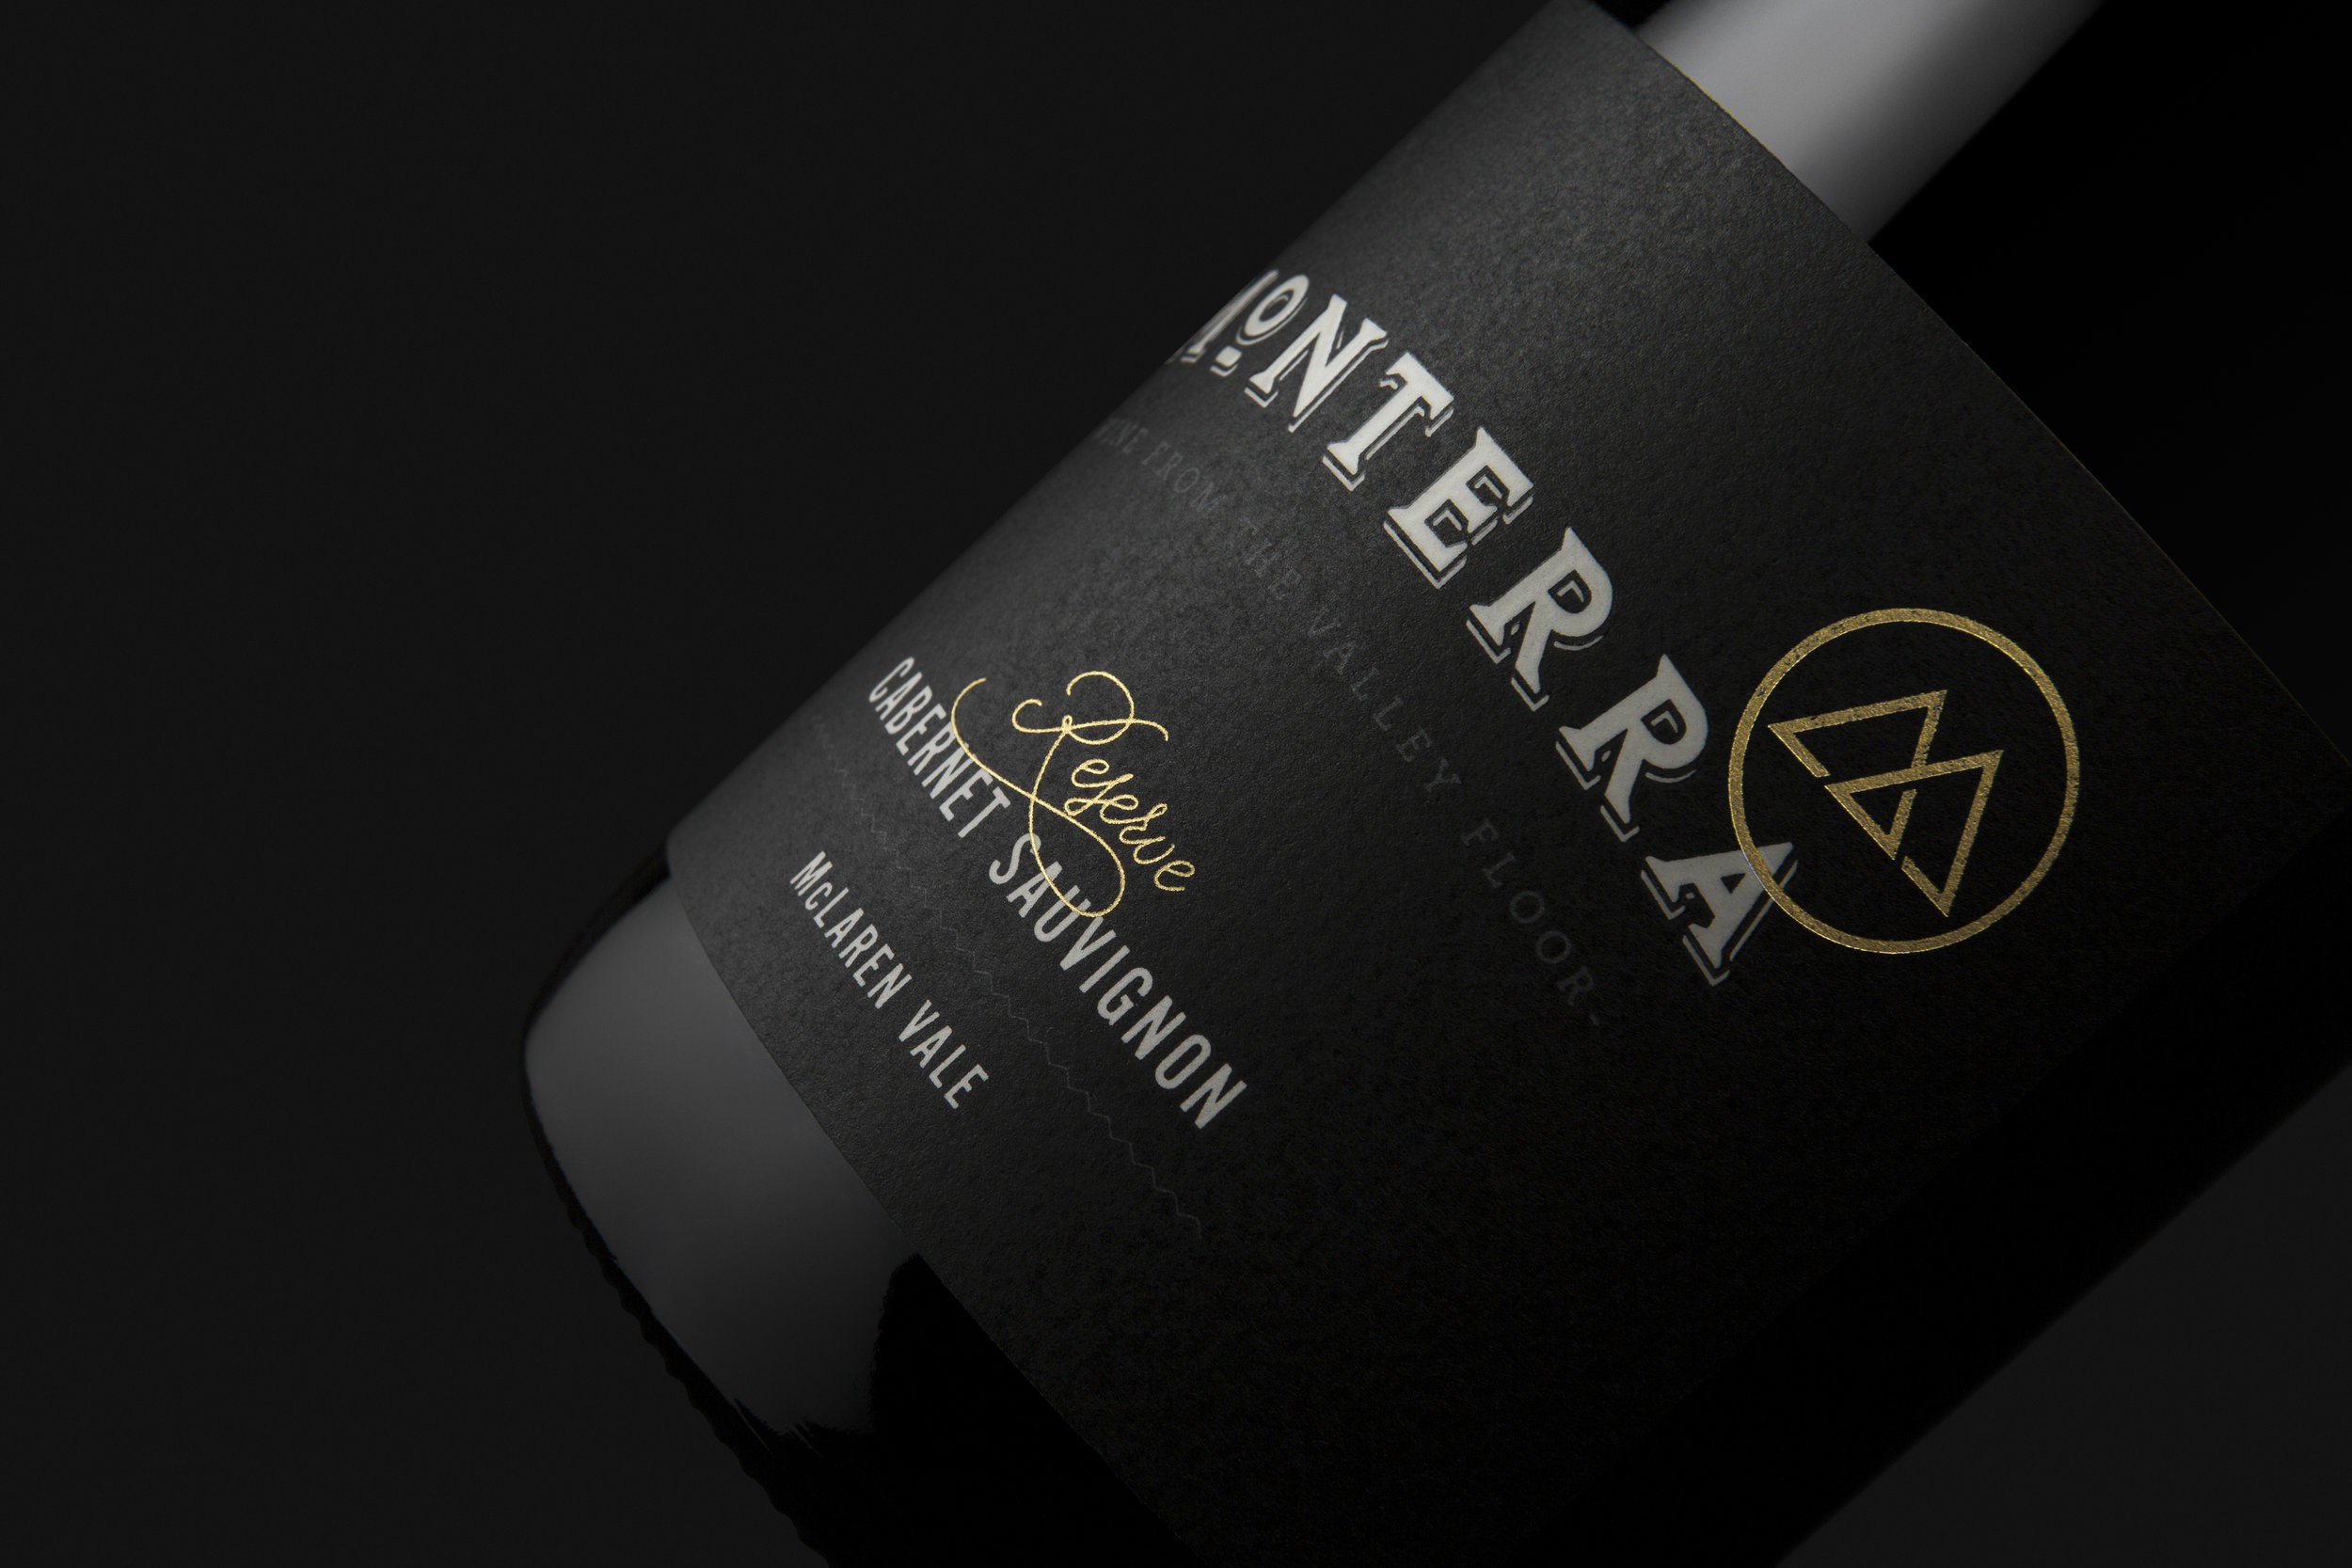 Reserve Labels for Monterra Wines